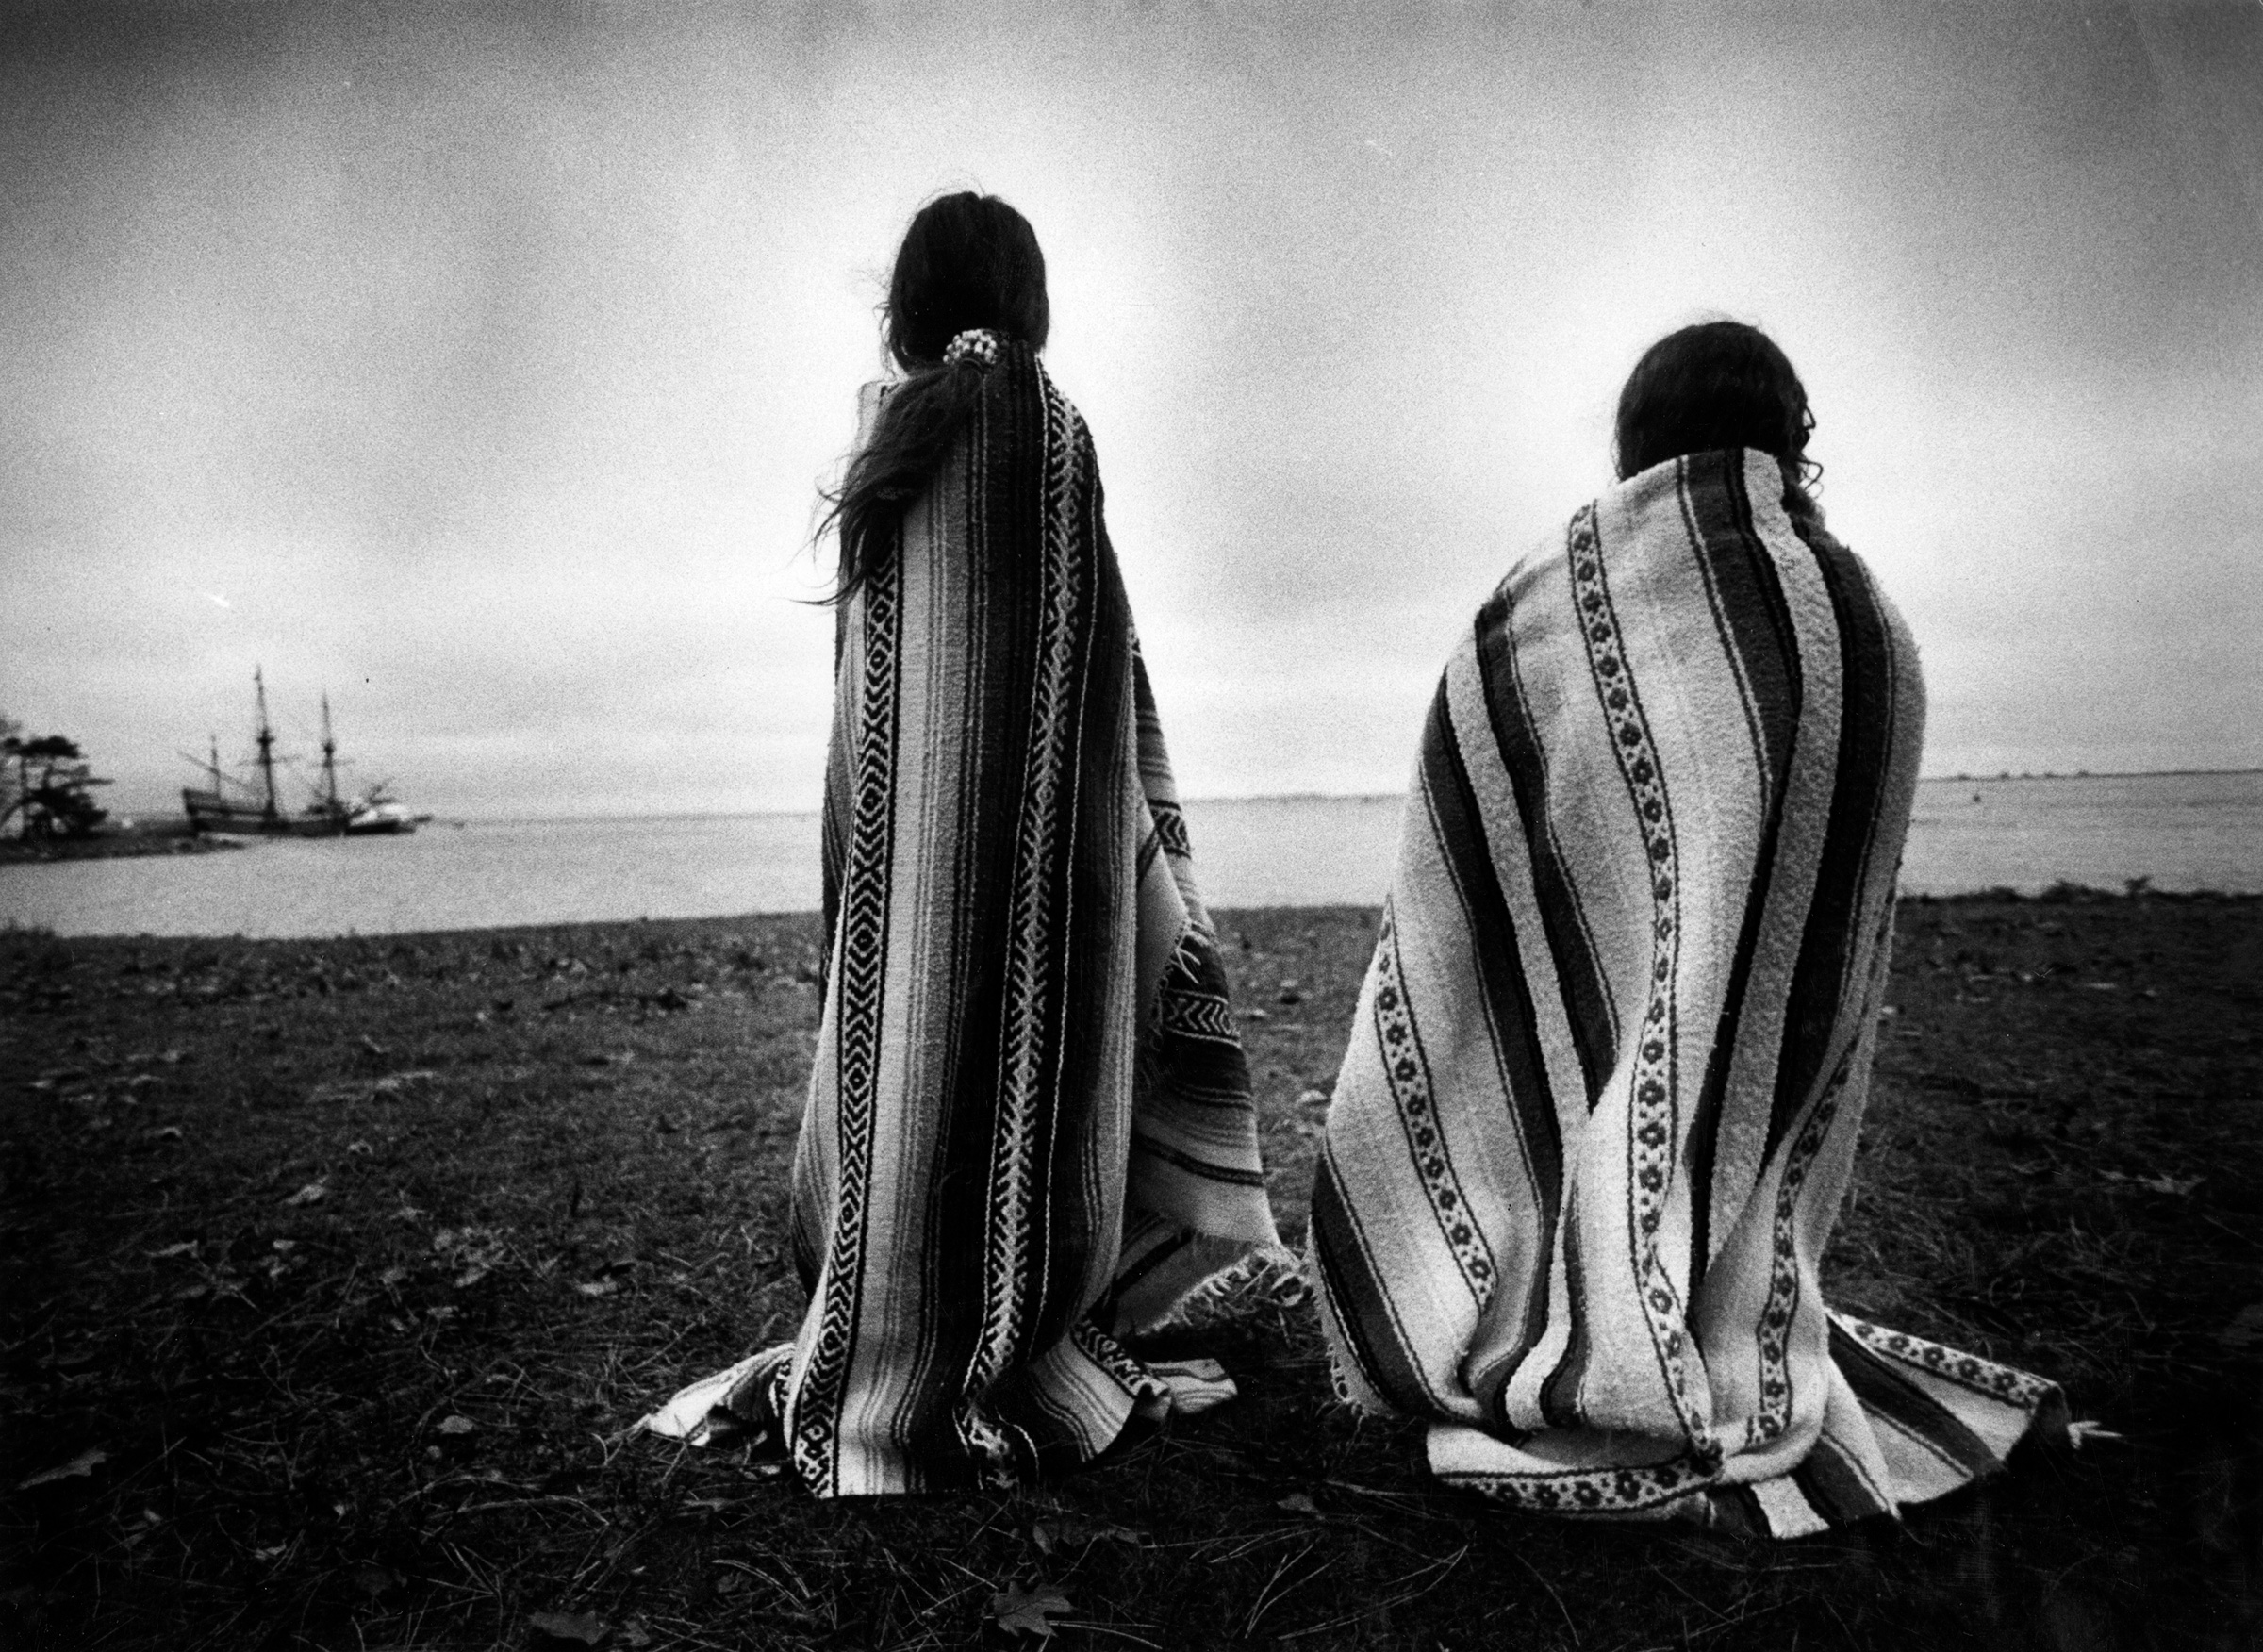 Weetoomoo Carey, 8, left, and Jackolynn Carey, 5, Wampanoag Nipmucs from Mashpee, look across to the Mayflower replica anchored near Plymouth Rock on Nov. 26, 1991. They were with a group of Native Americans gathered for a day of mourning in response to the Pilgrims' Thanksgiving (Suzanne Kreiter—The Boston Globe/Getty Images)